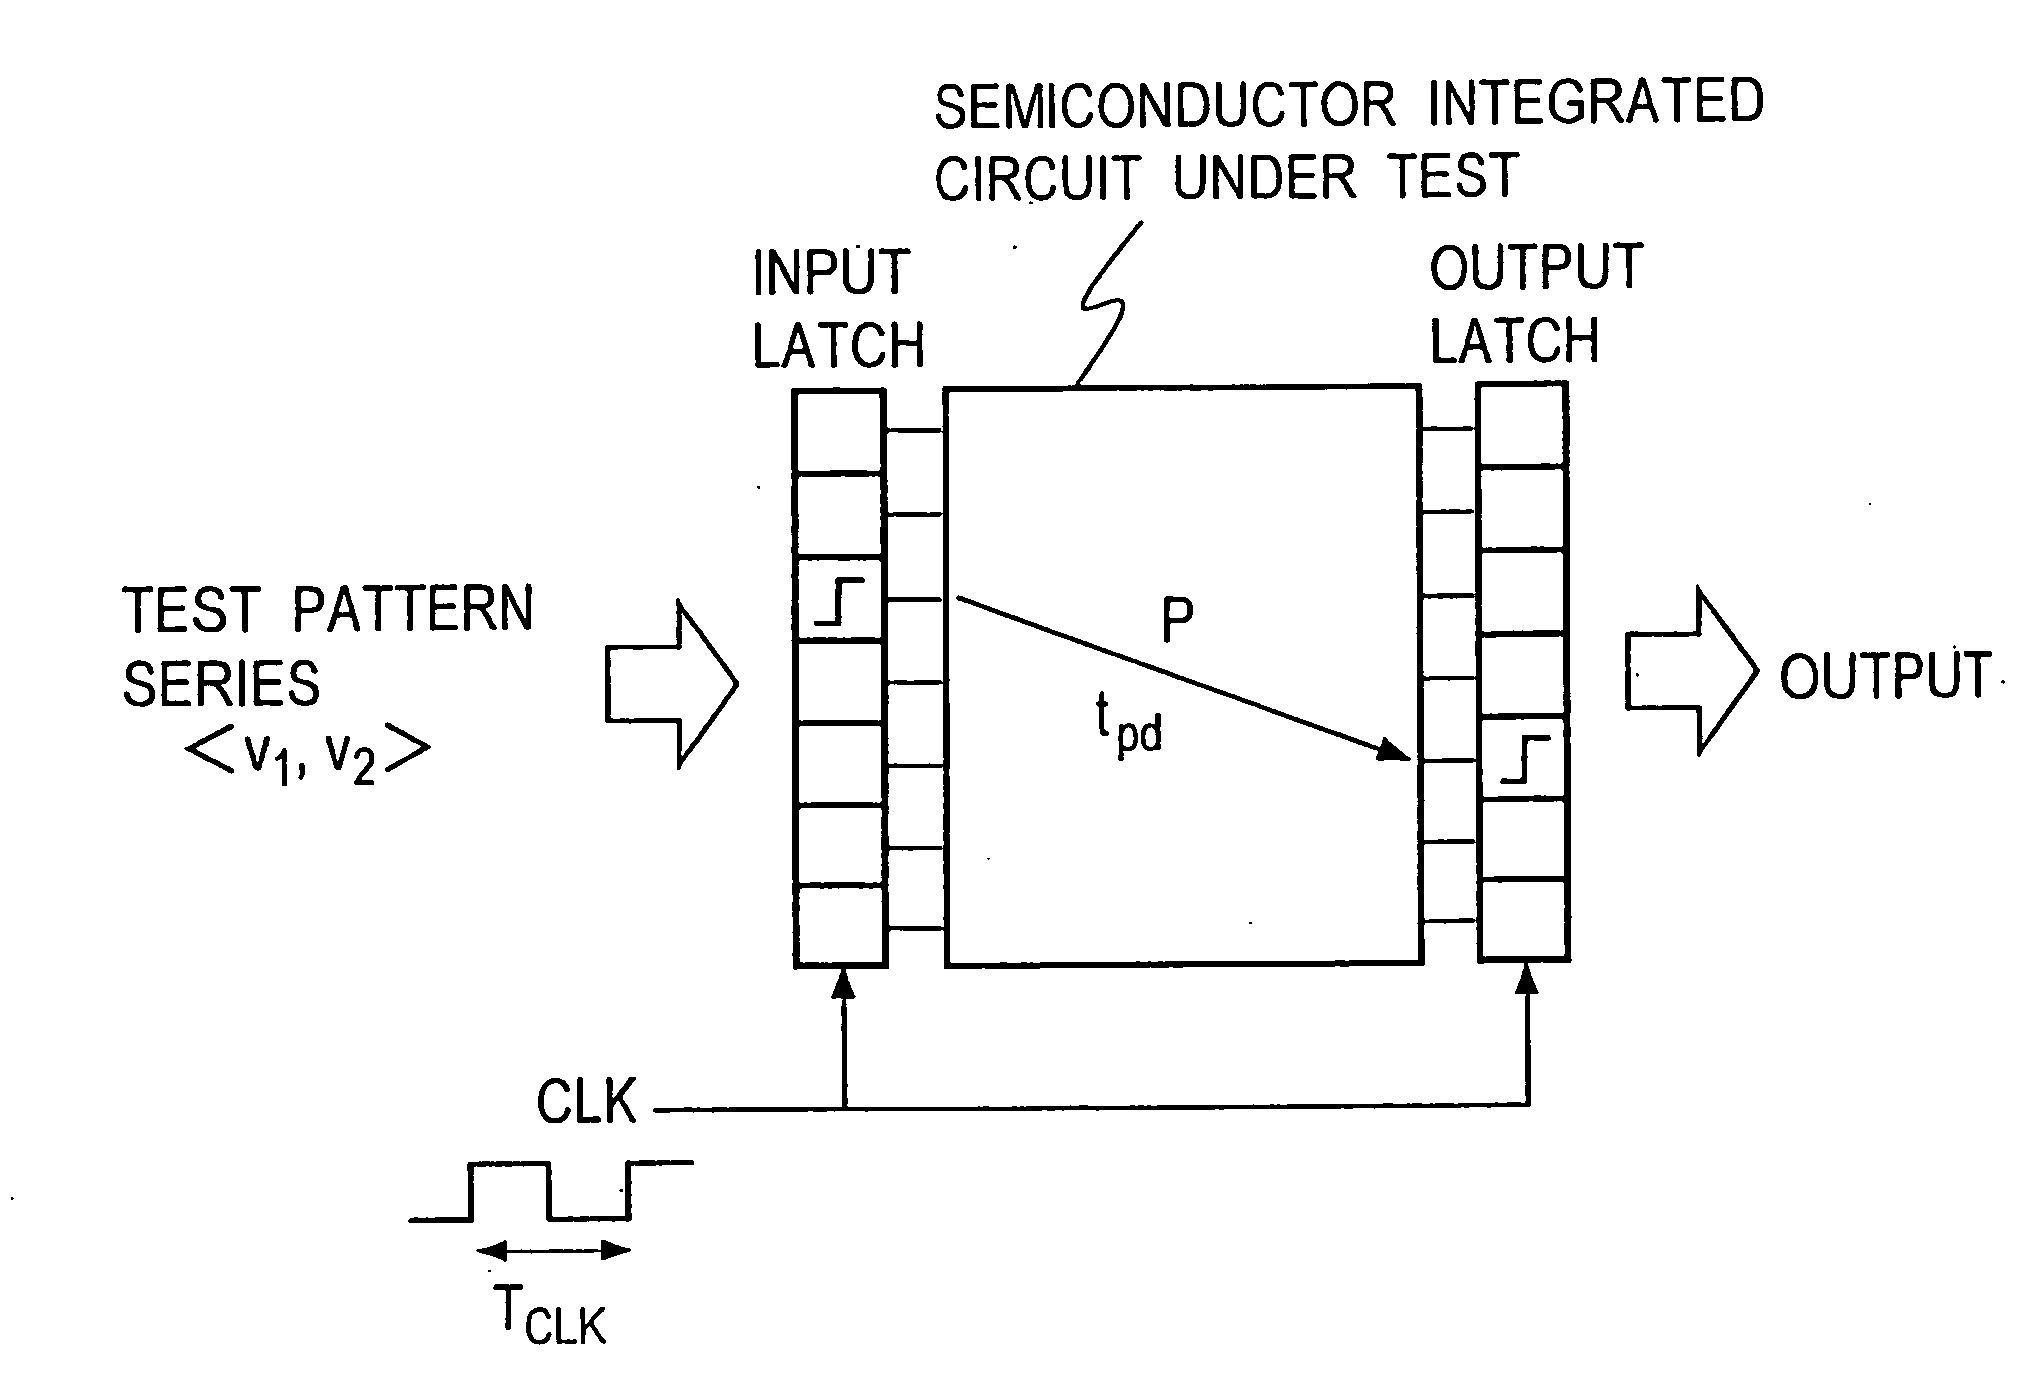 Generating test patterns used in testing semiconductor integrated circuit